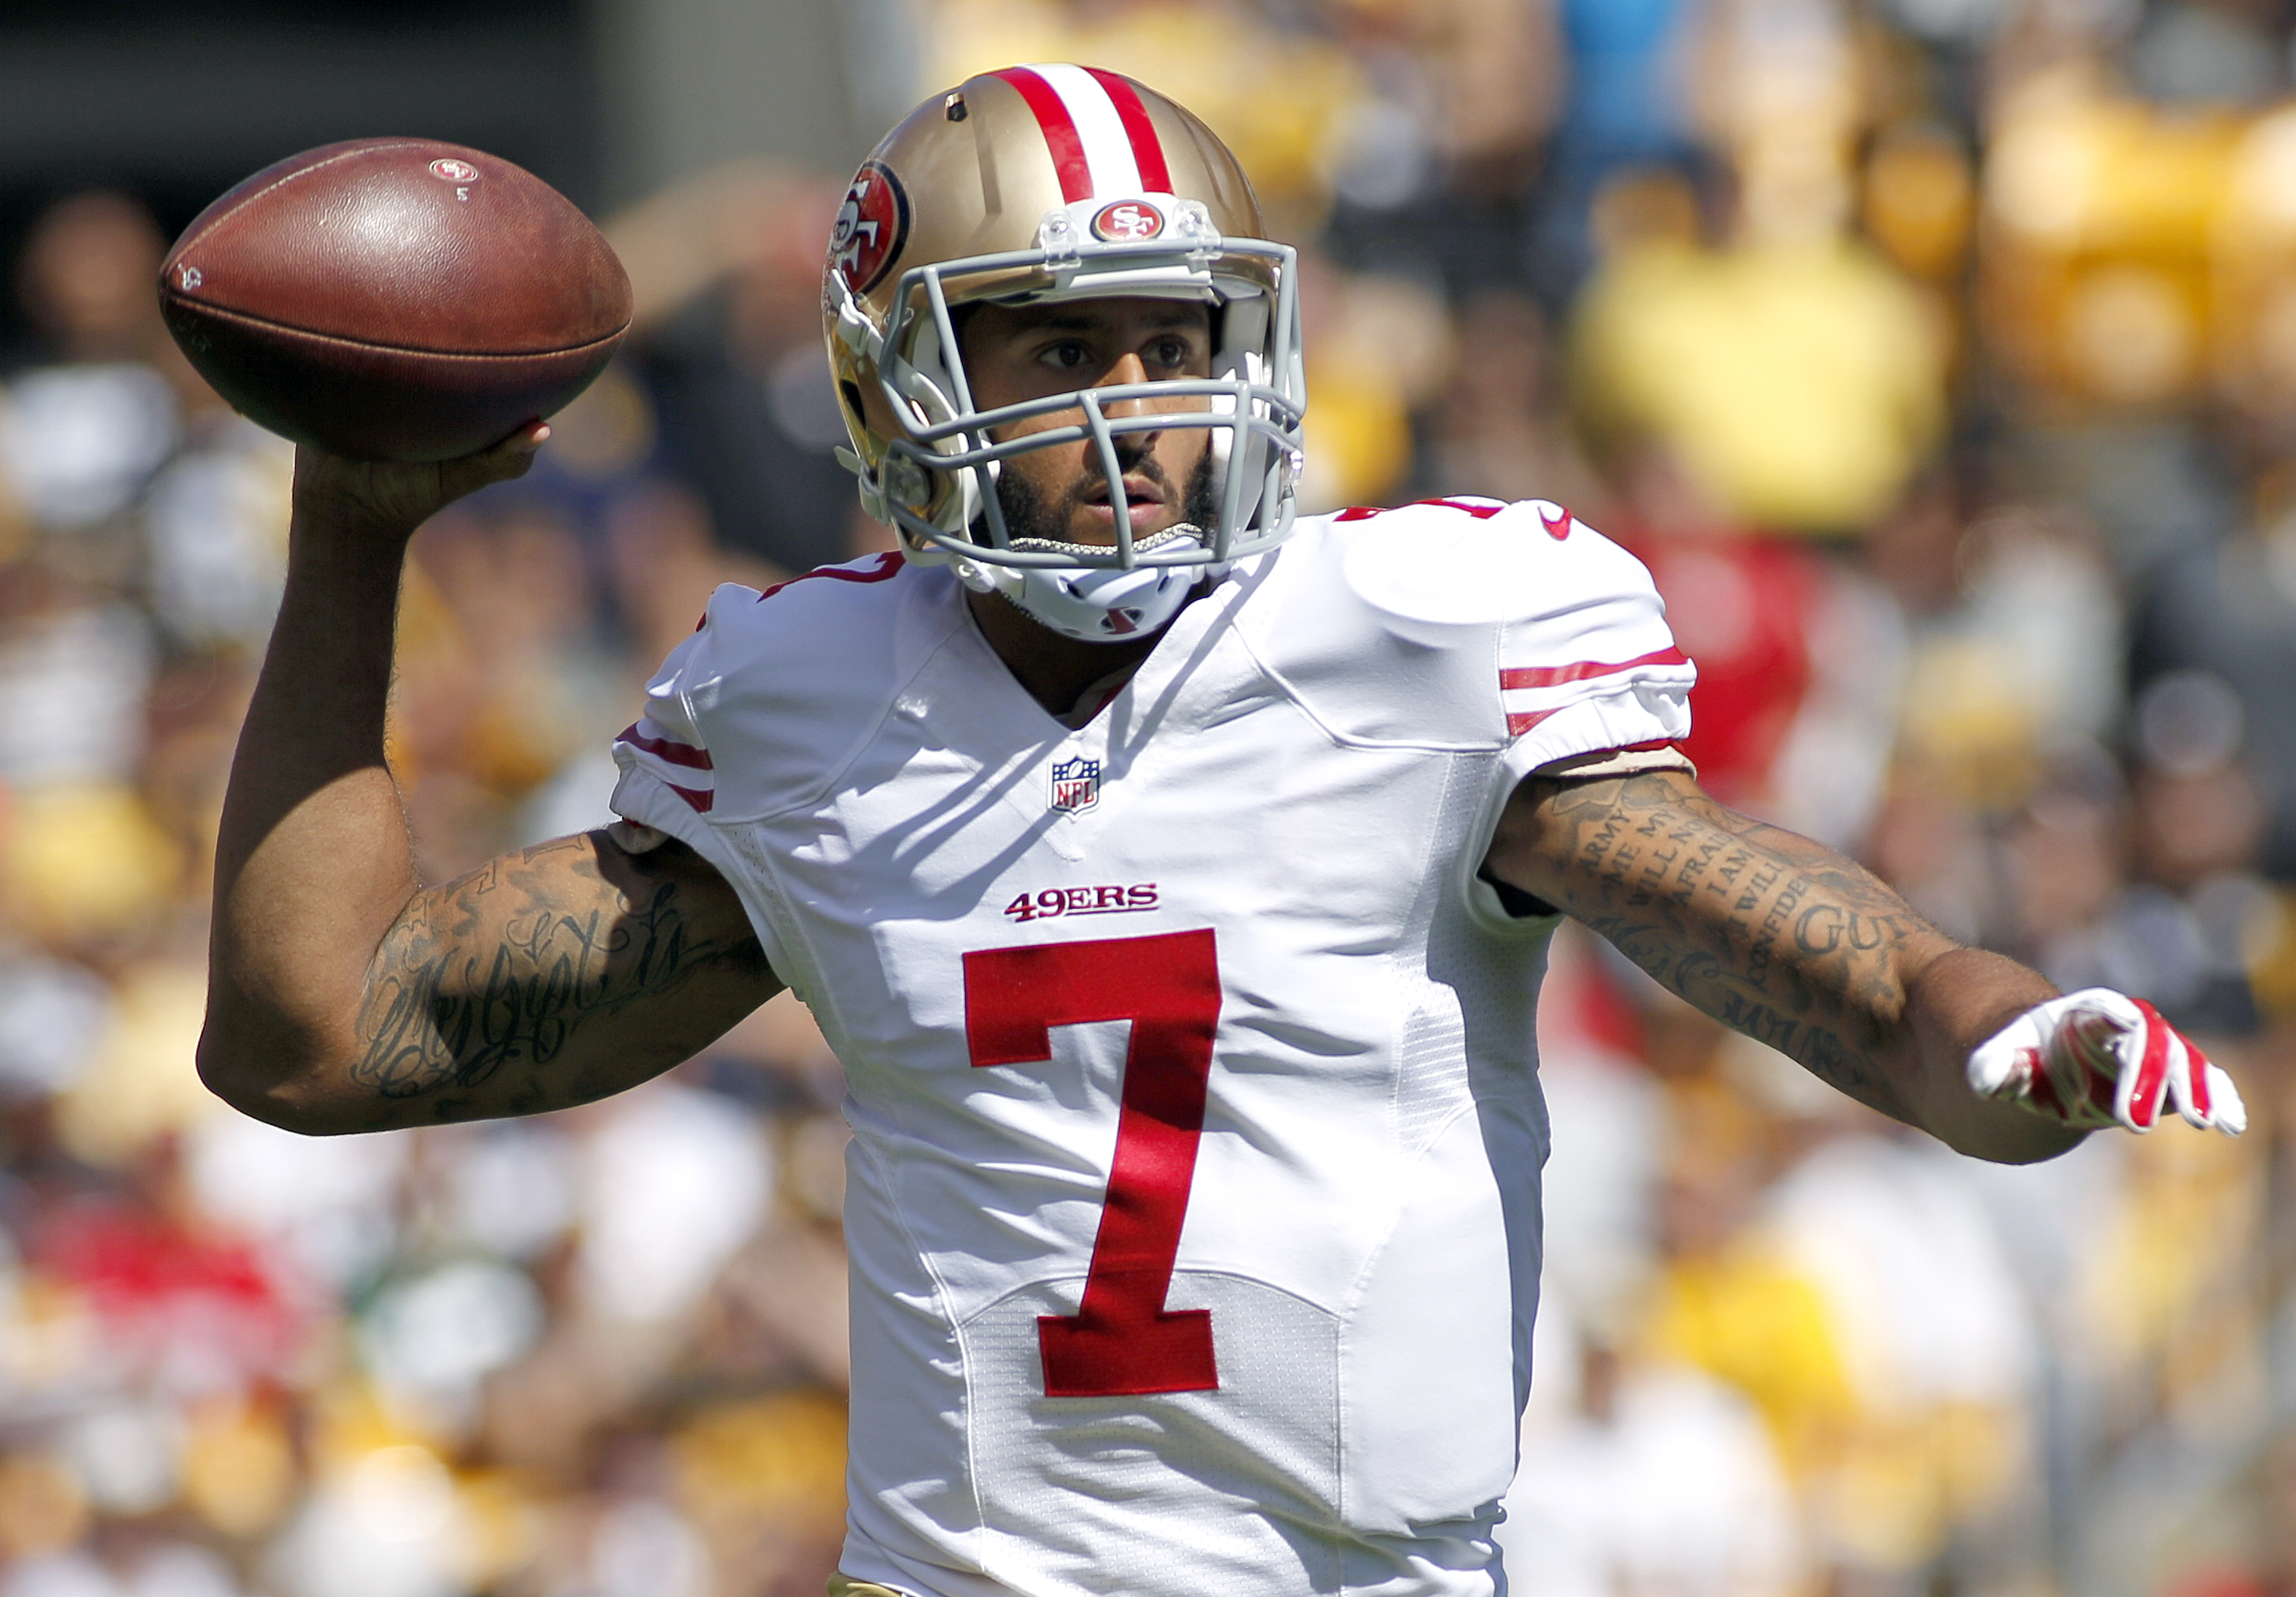 Colin Kaepernick Says He's 'Still Ready' To Play After People Call On